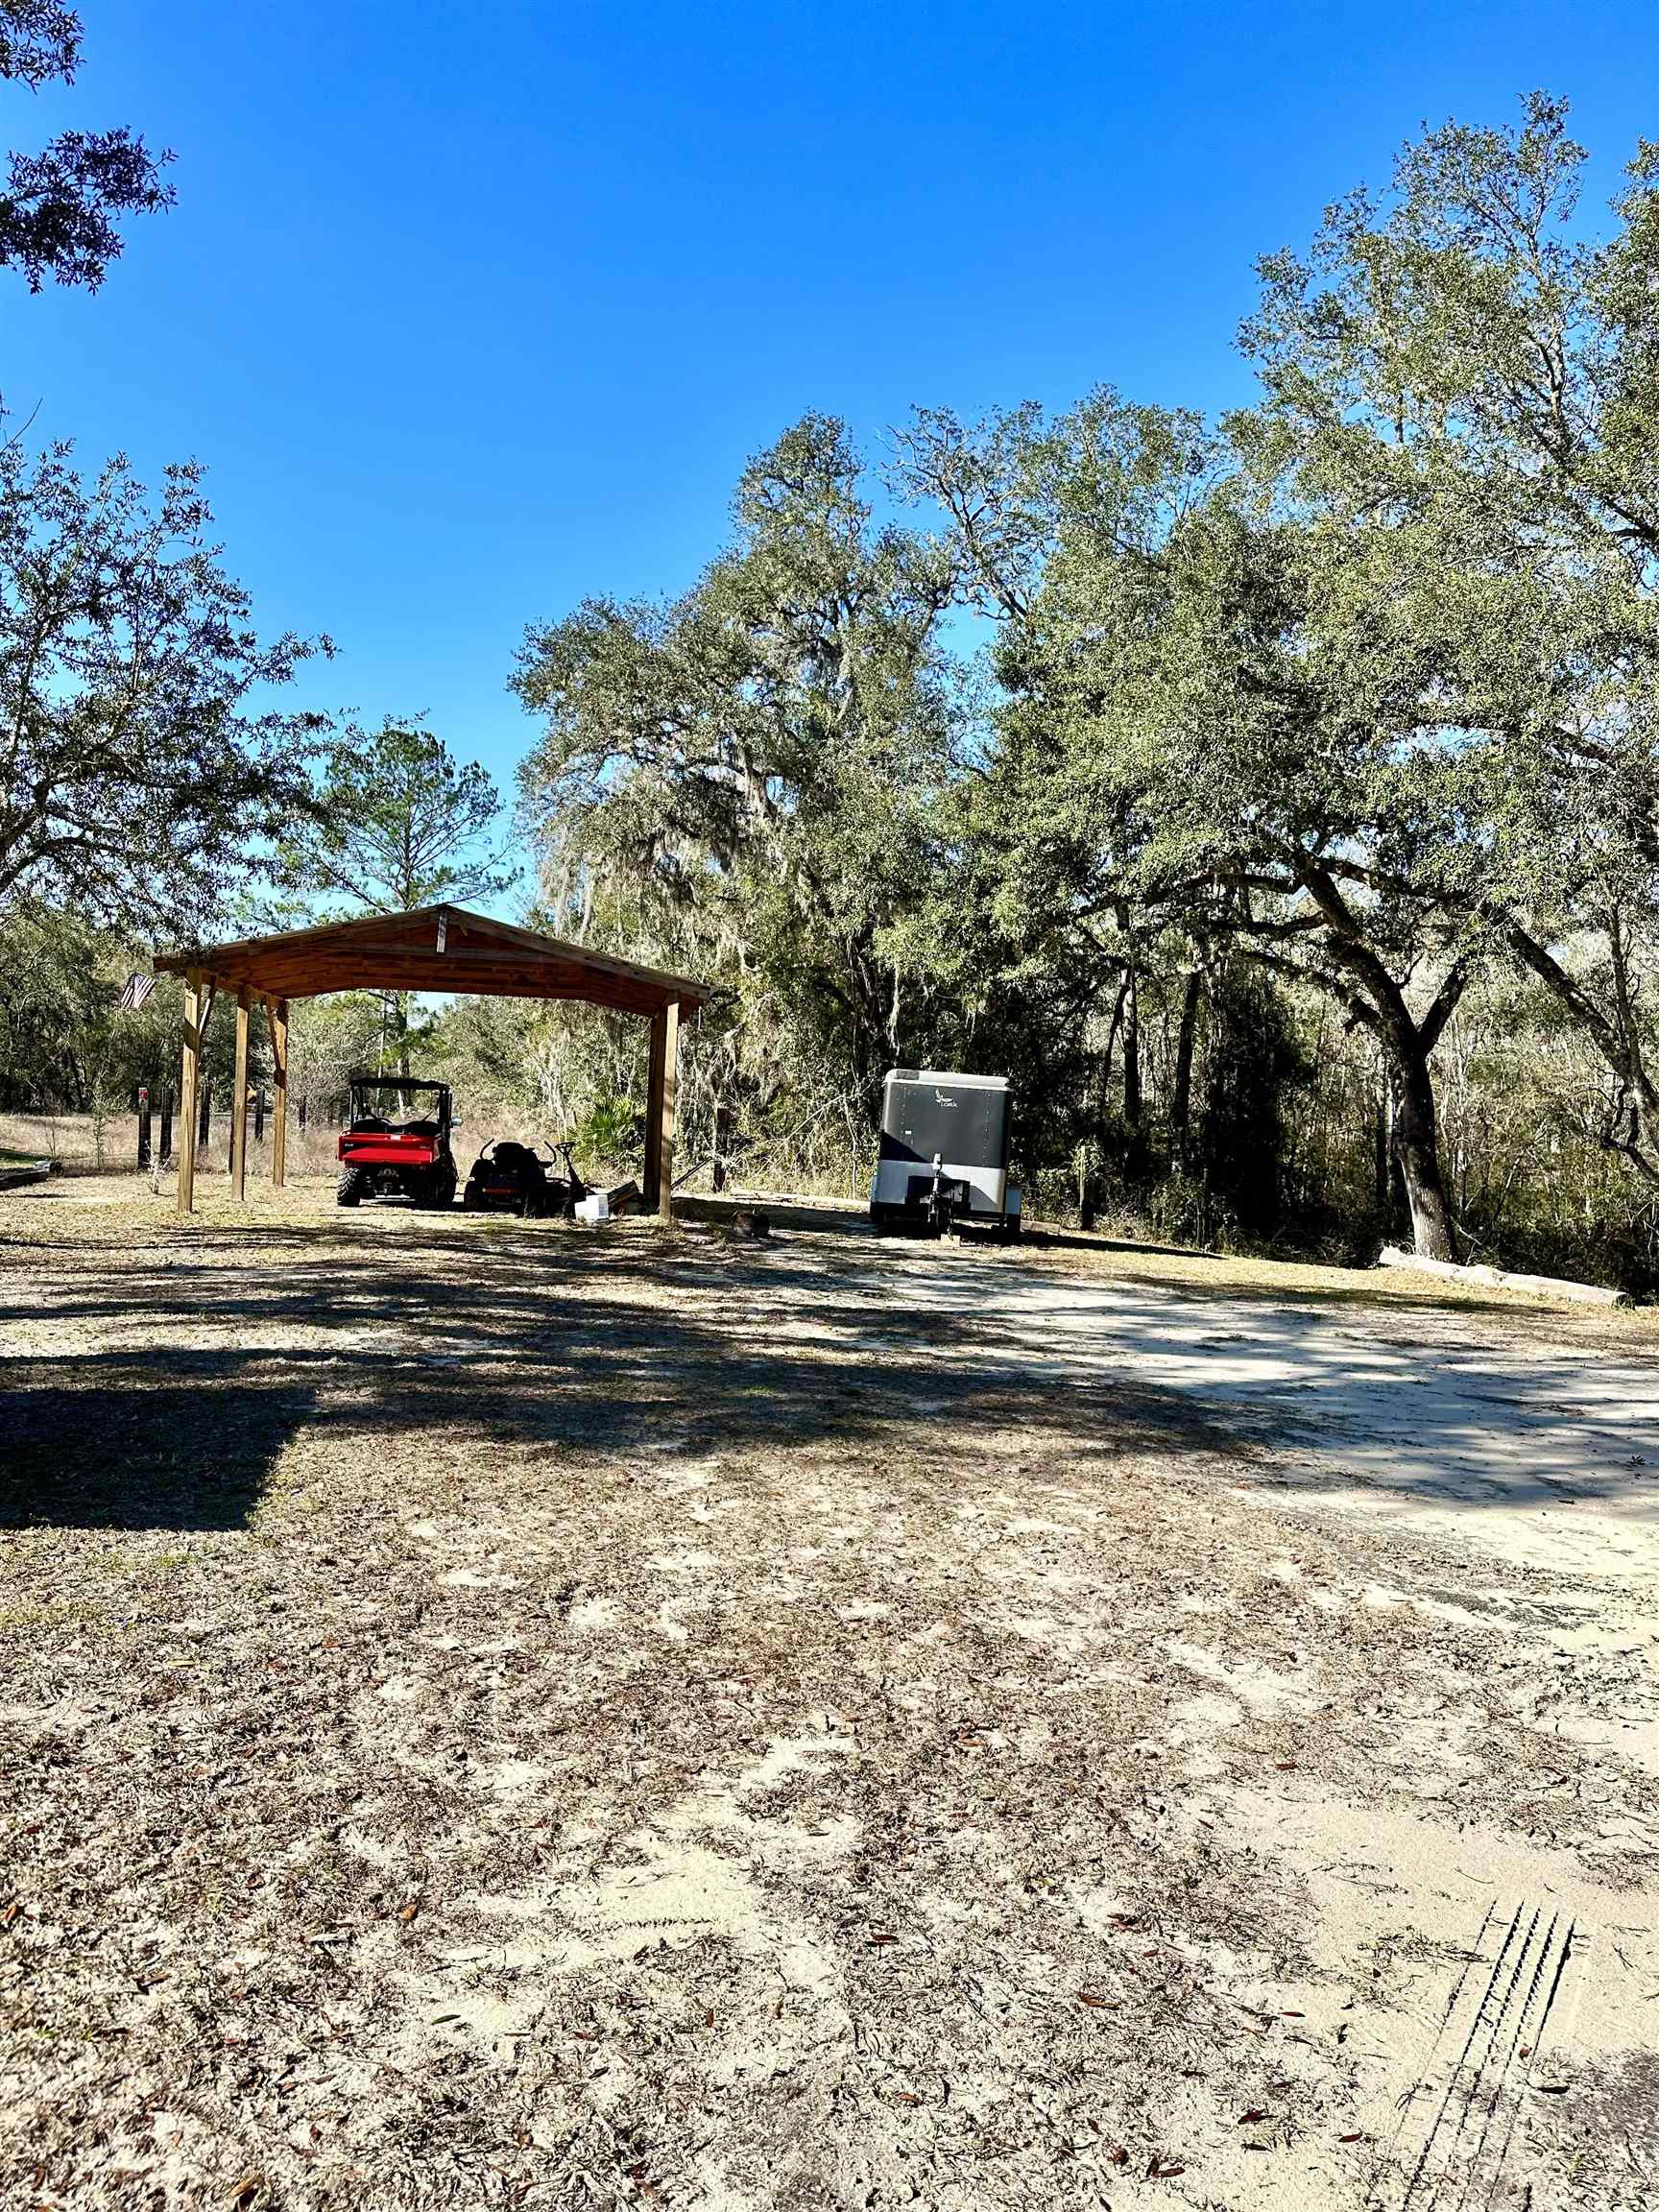 6010 Ira L. Smith Road,GREENVILLE,Florida 32331,3 Bedrooms Bedrooms,2 BathroomsBathrooms,Manuf/mobile home,6010 Ira L. Smith Road,366857